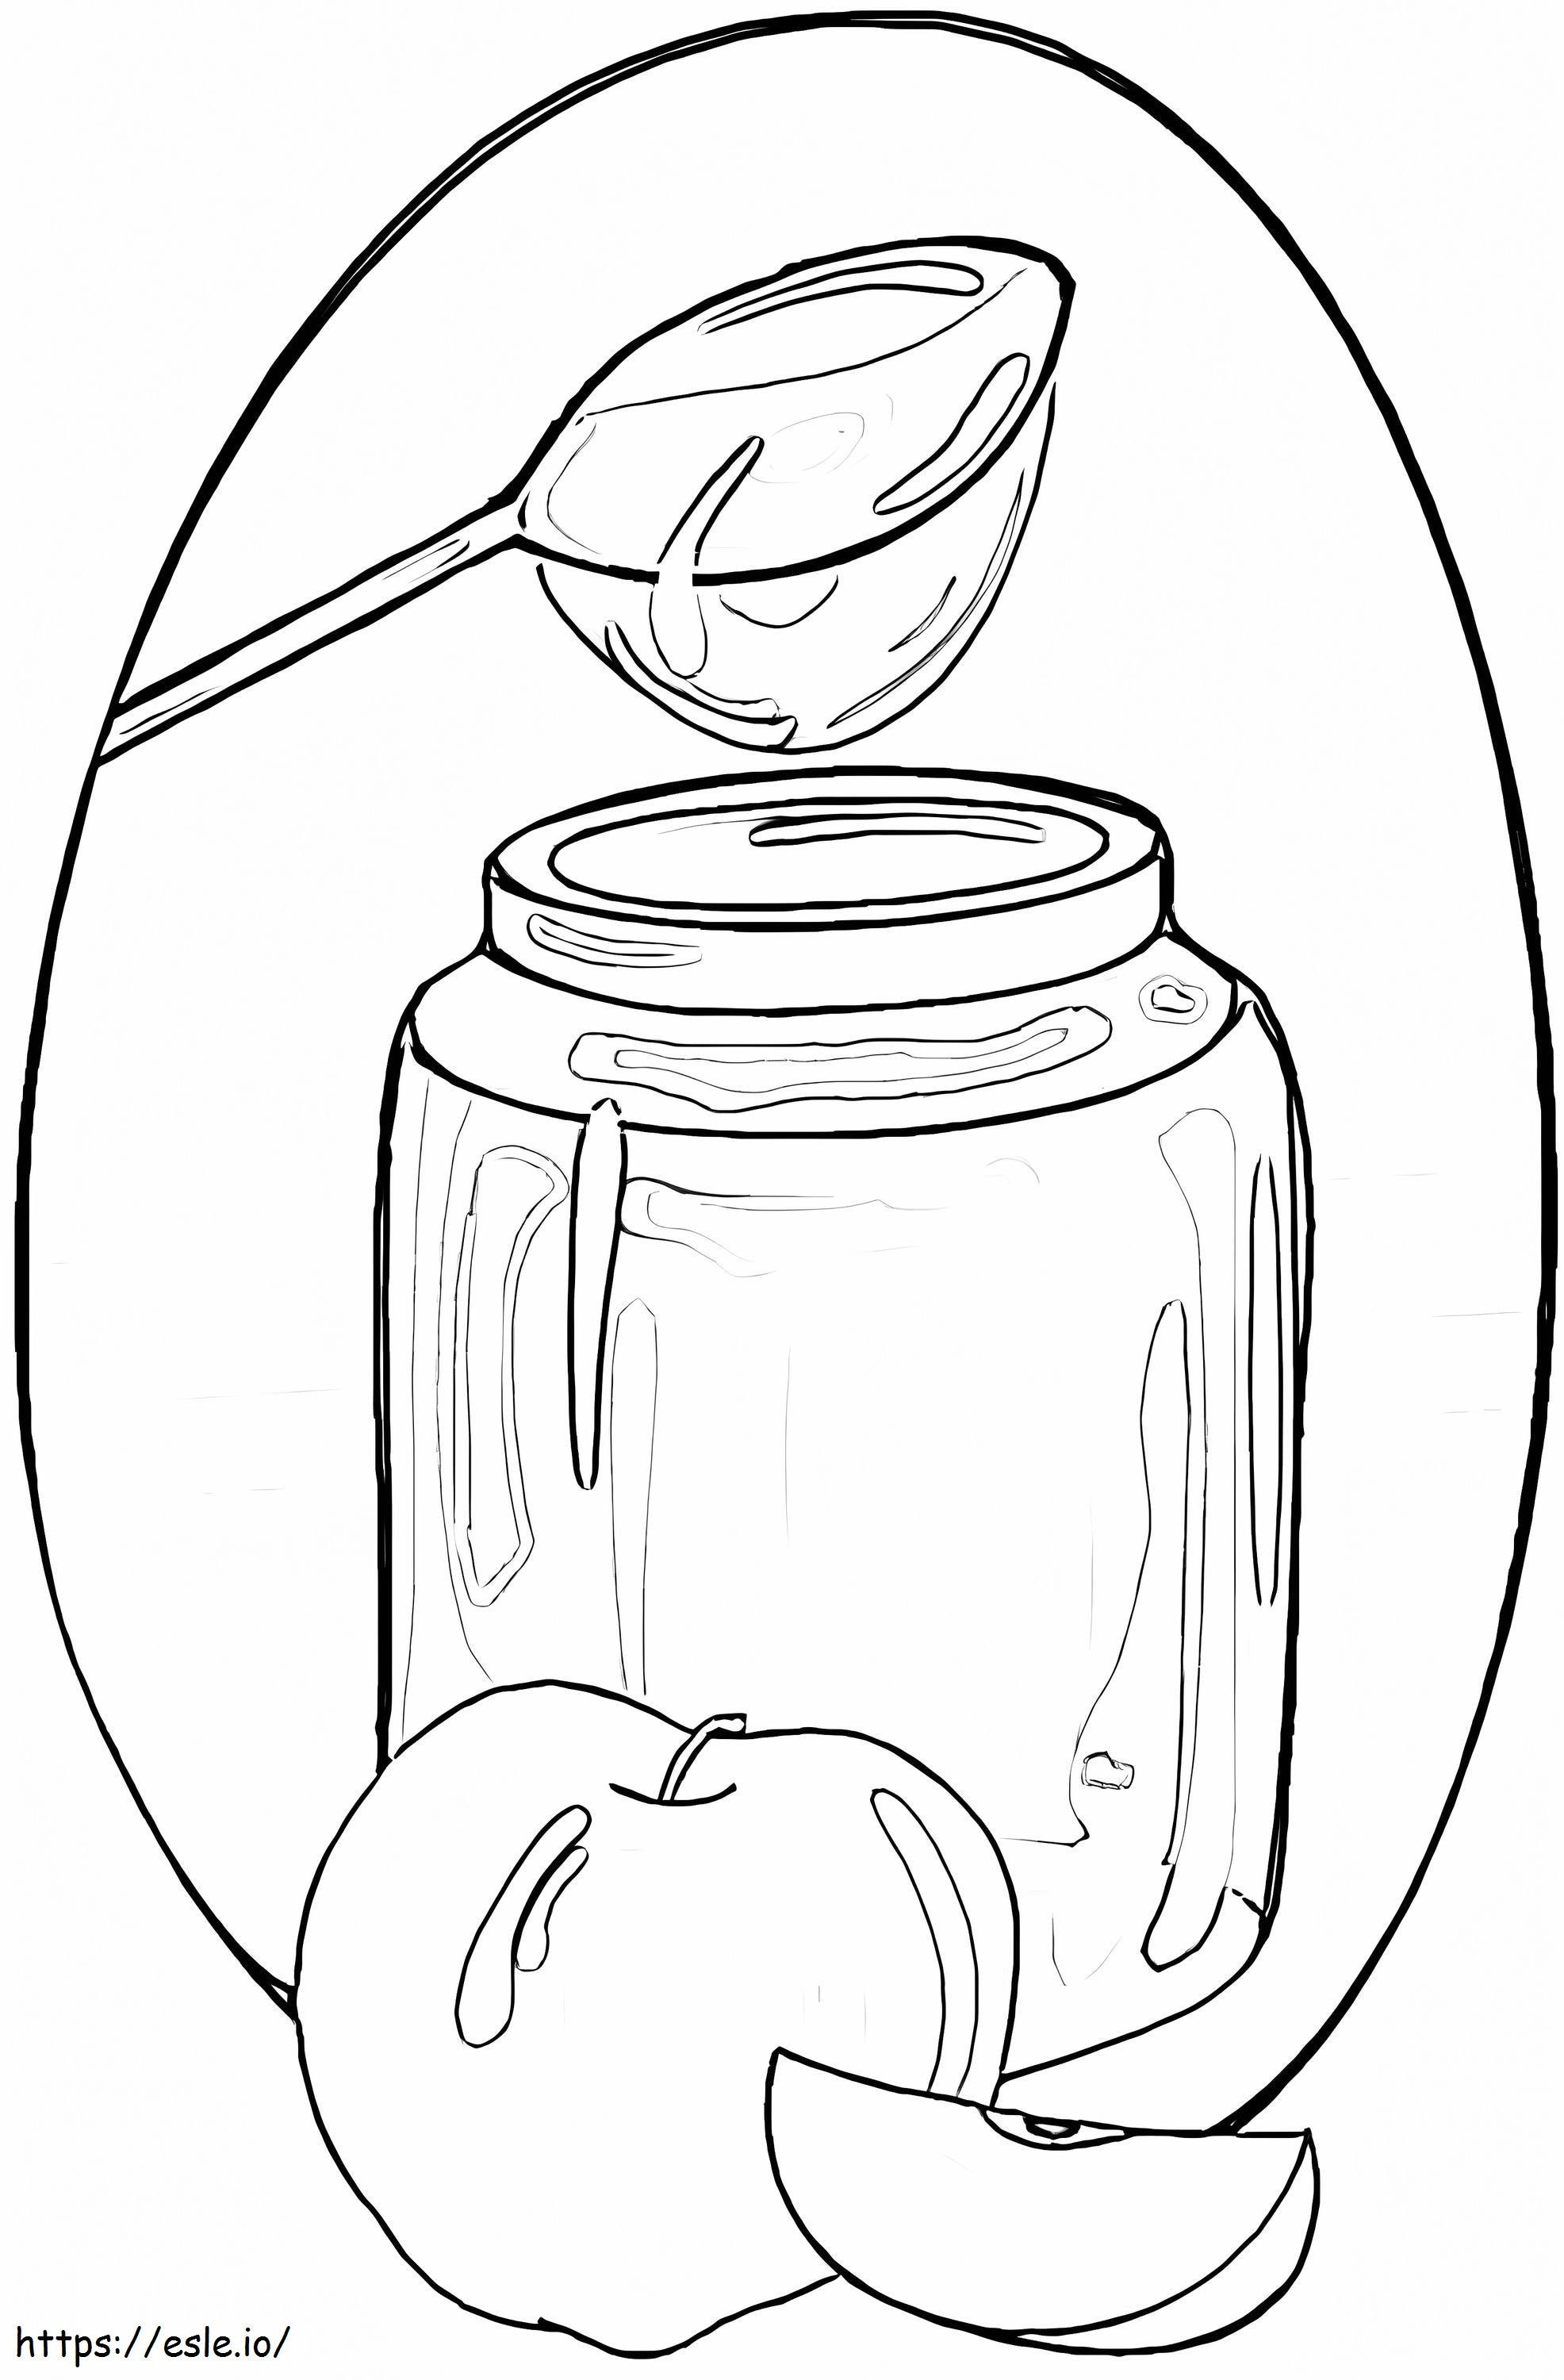 Honey And Apples coloring page